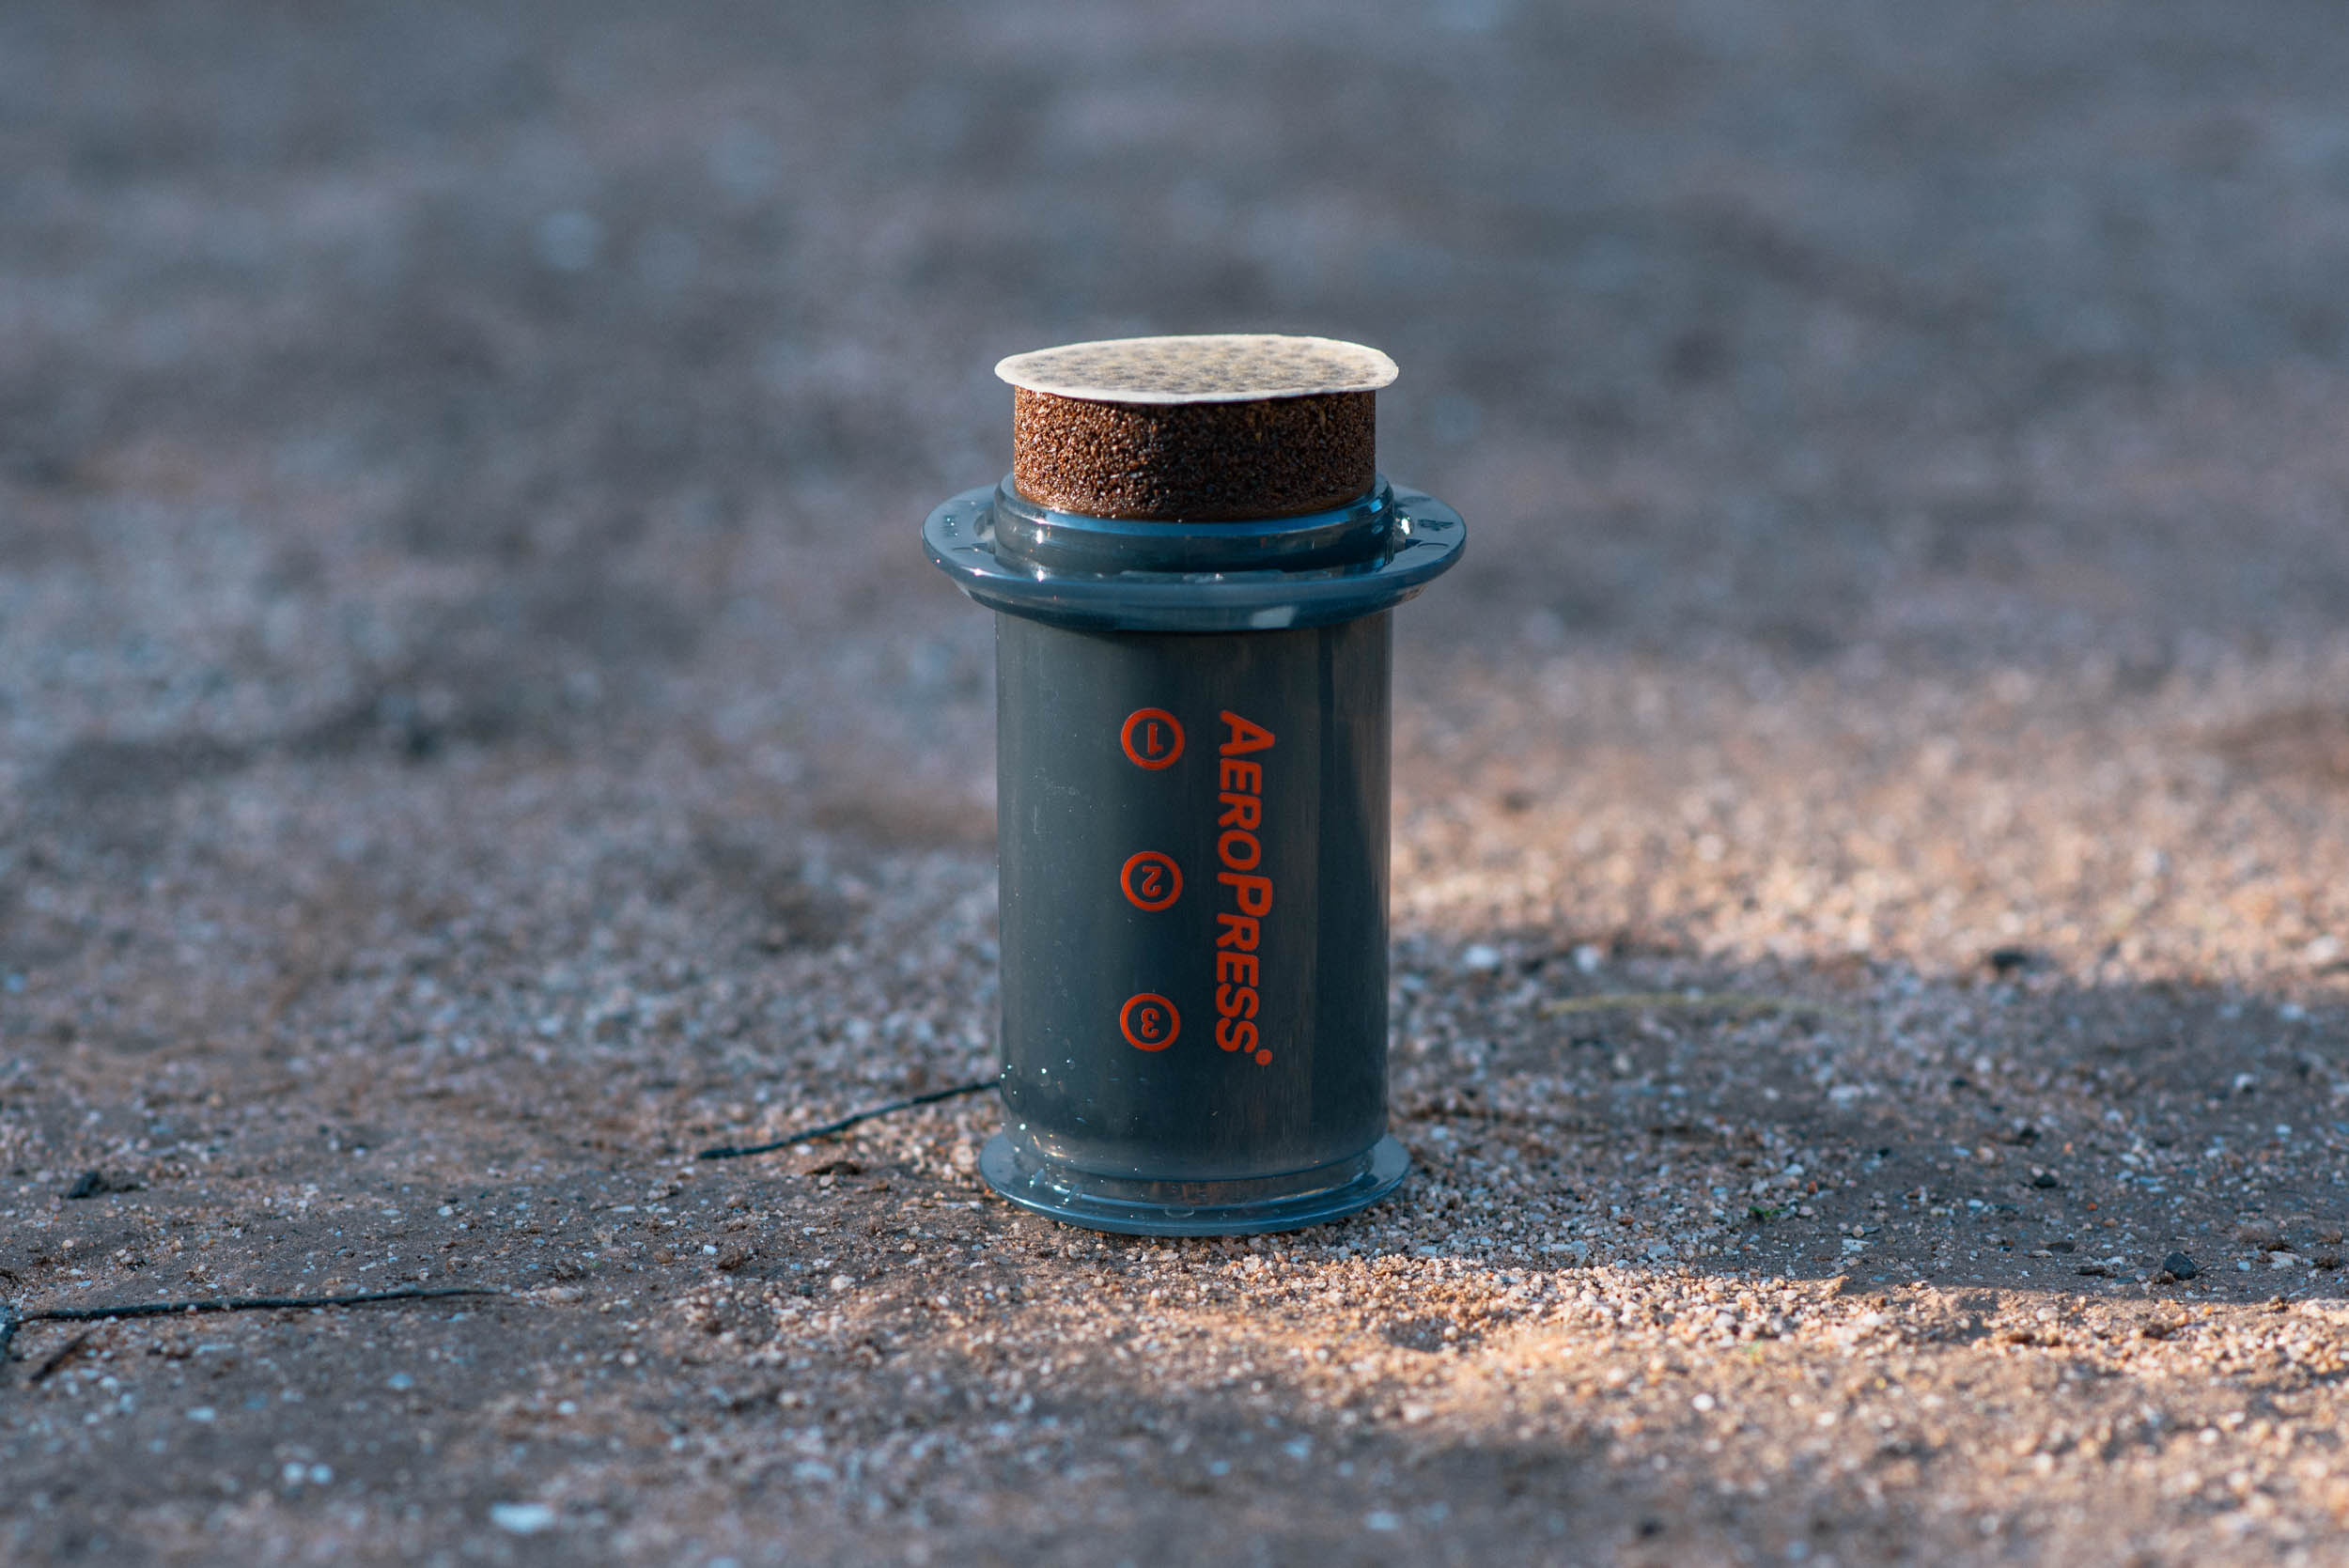 Aeropress Go Review: Is it Better than the Original?